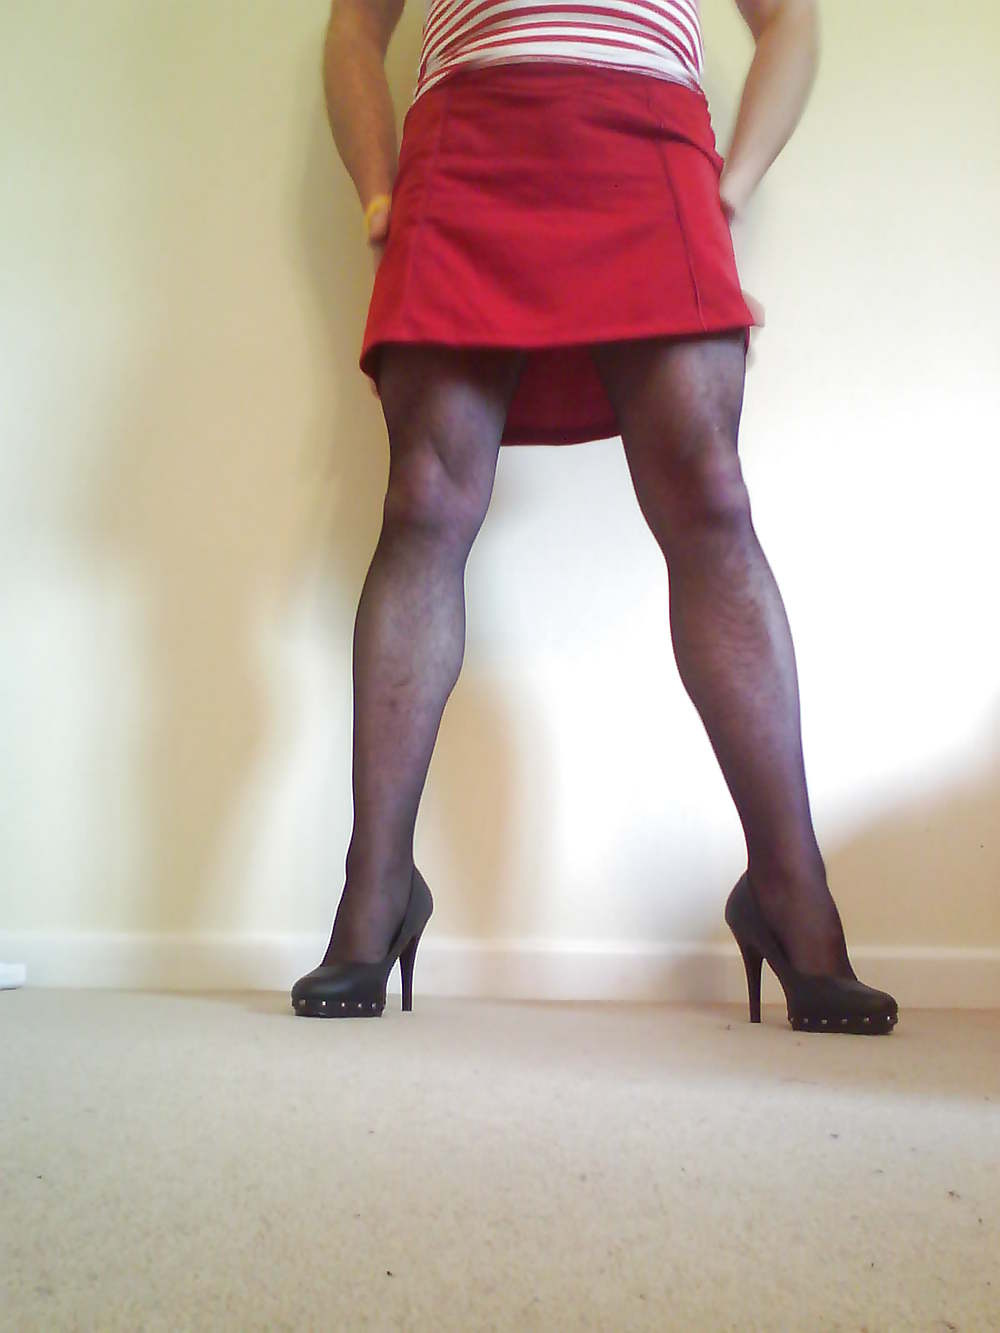 More stockings and killer heels #3966277